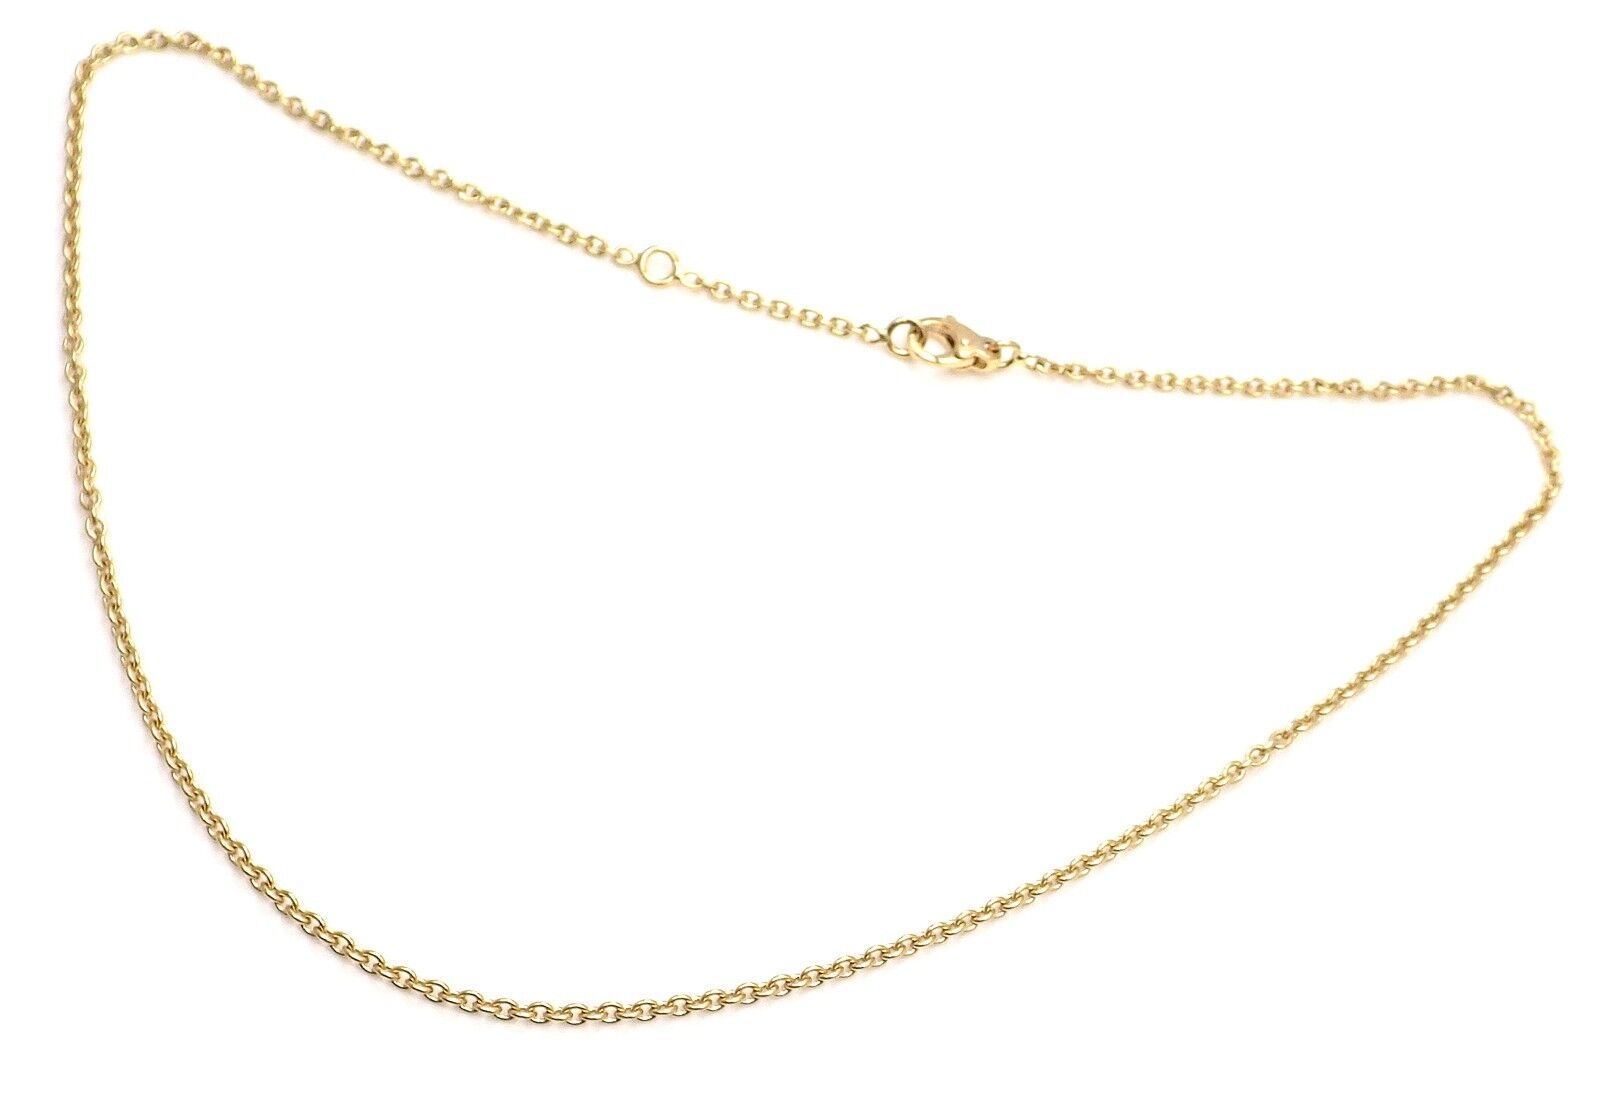 Authentic Chanel 18K Yellow Gold Classic Round Chain Necklace 14.75 to 15.75